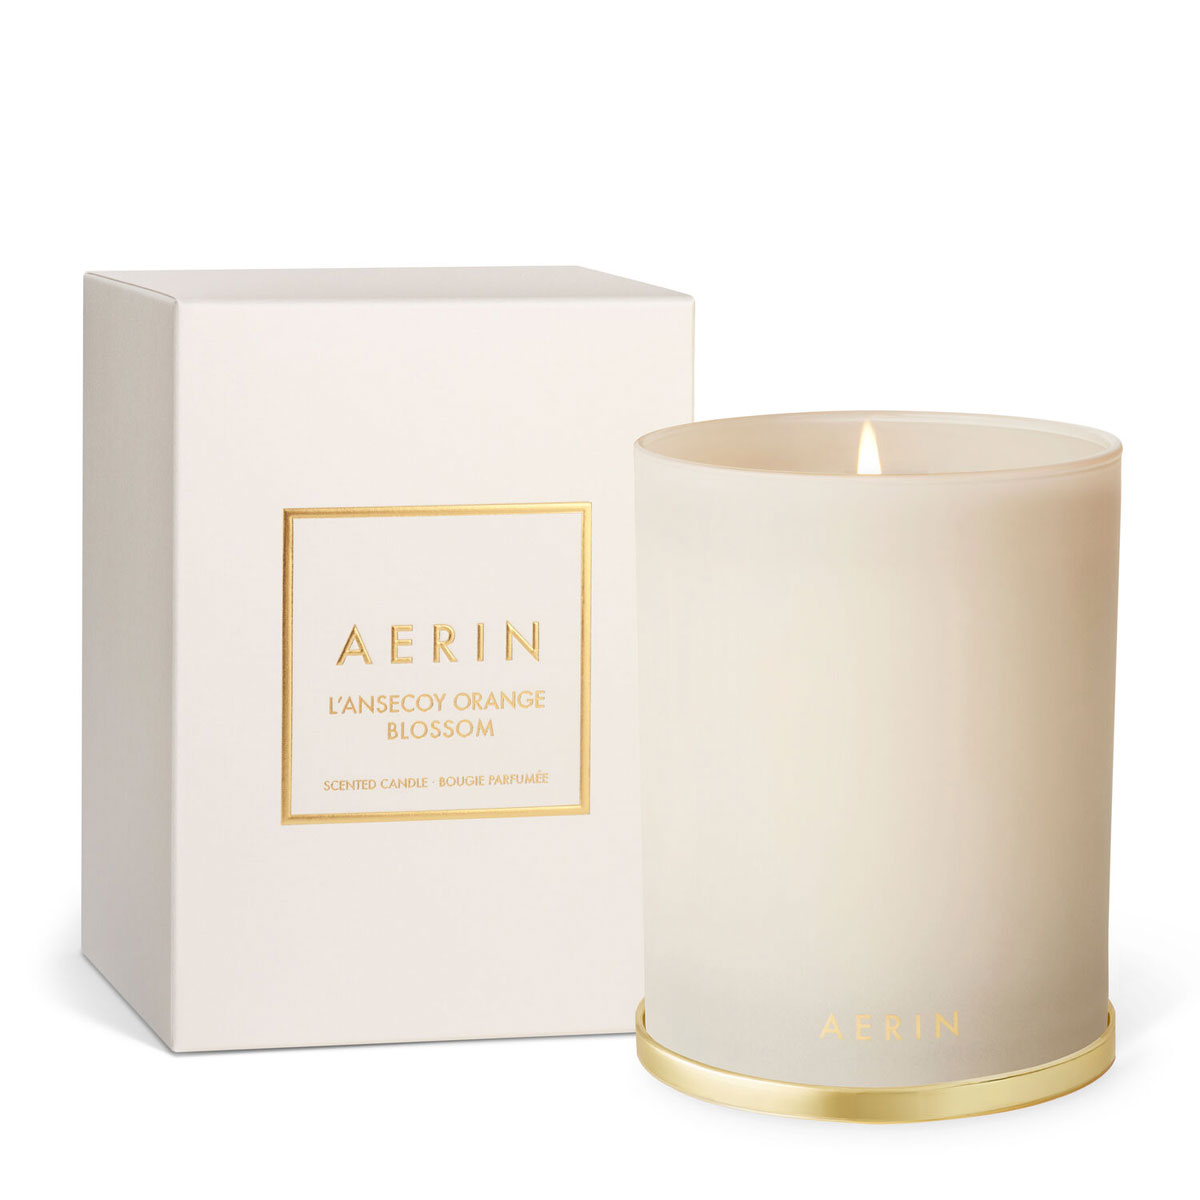 Aerin L'Ansecoy Orange Blossom Single Wick Candle in Gift Box